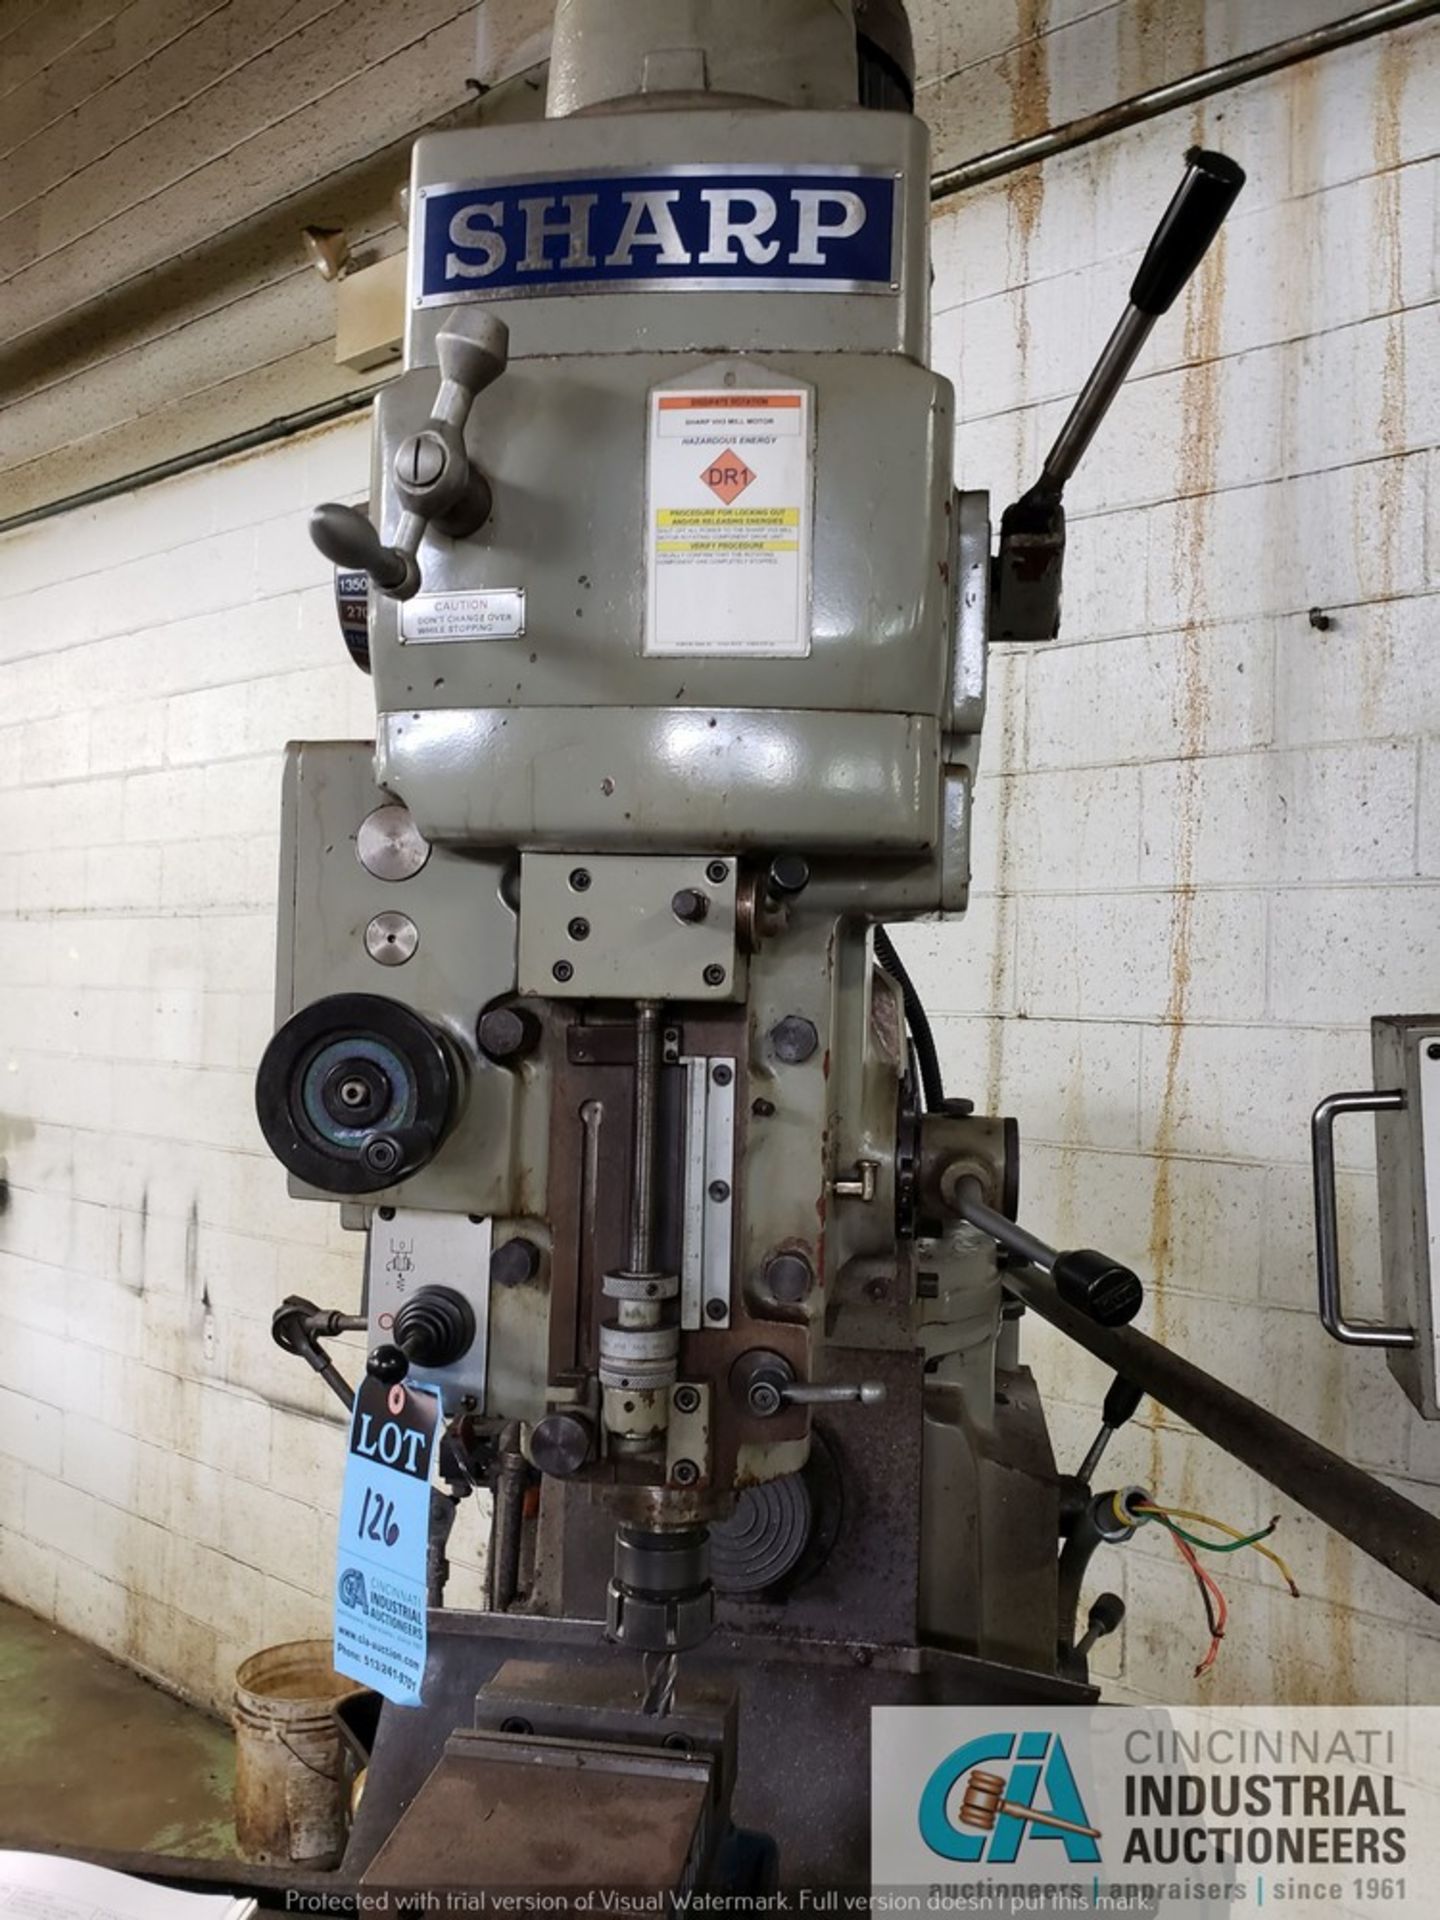 SHARPE MODEL VH3 VERTICAL MILLING MACHINE; S/N 2B399, 12" X 52" TABLE, SPINDLE SPEED 35-1,700 RPM, - Image 3 of 10